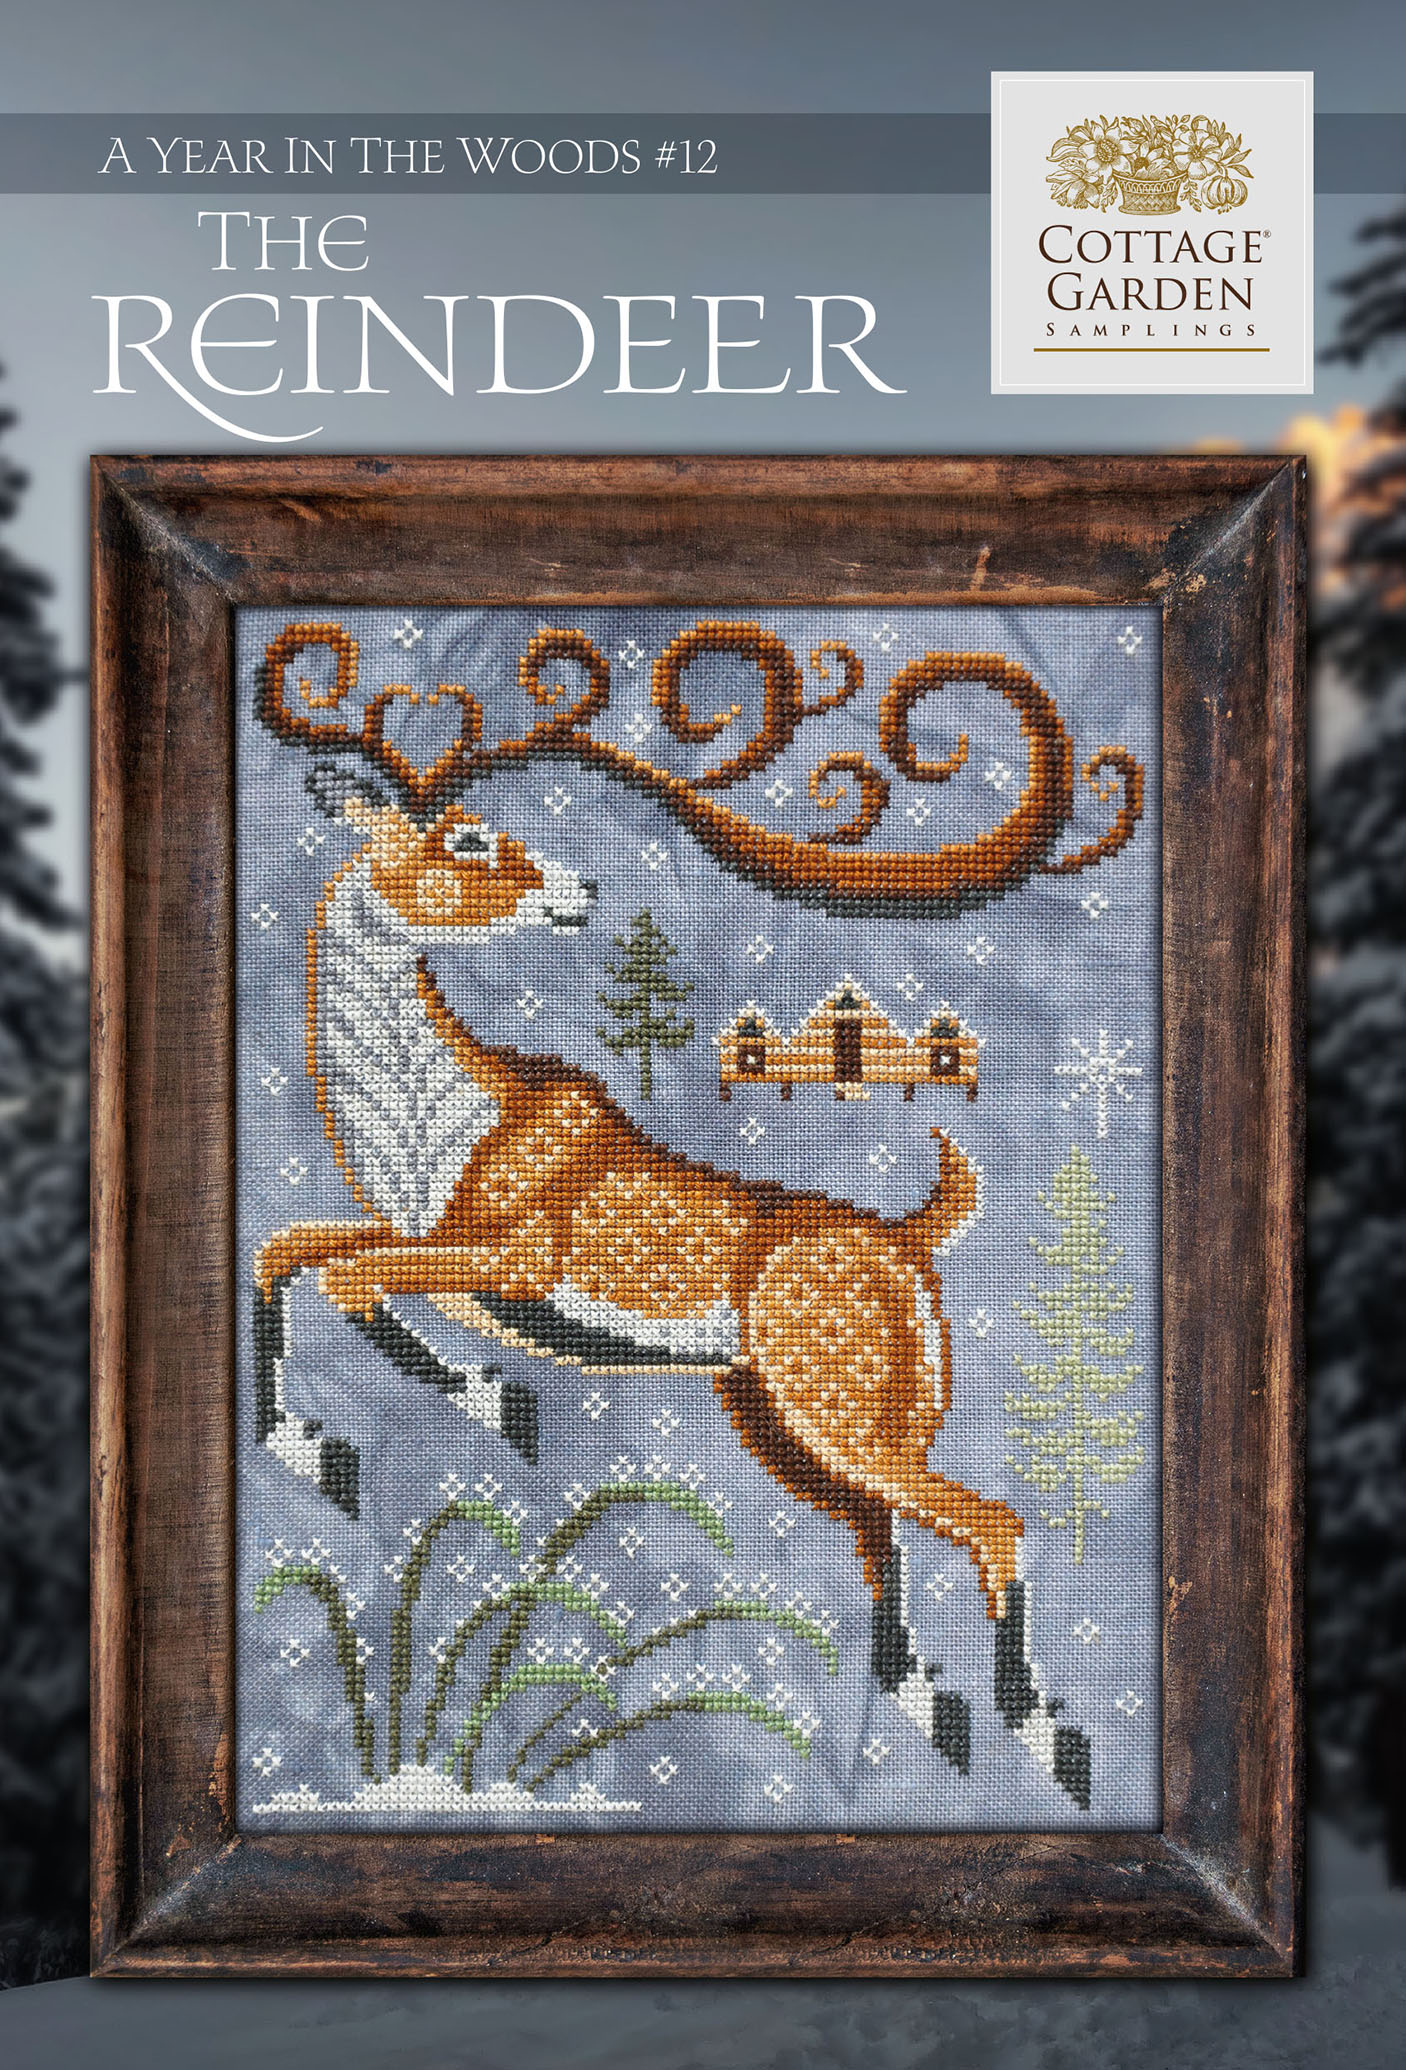 A Year in the Woods - Series 12 - The Reindeer by Cottage Garden Samplings